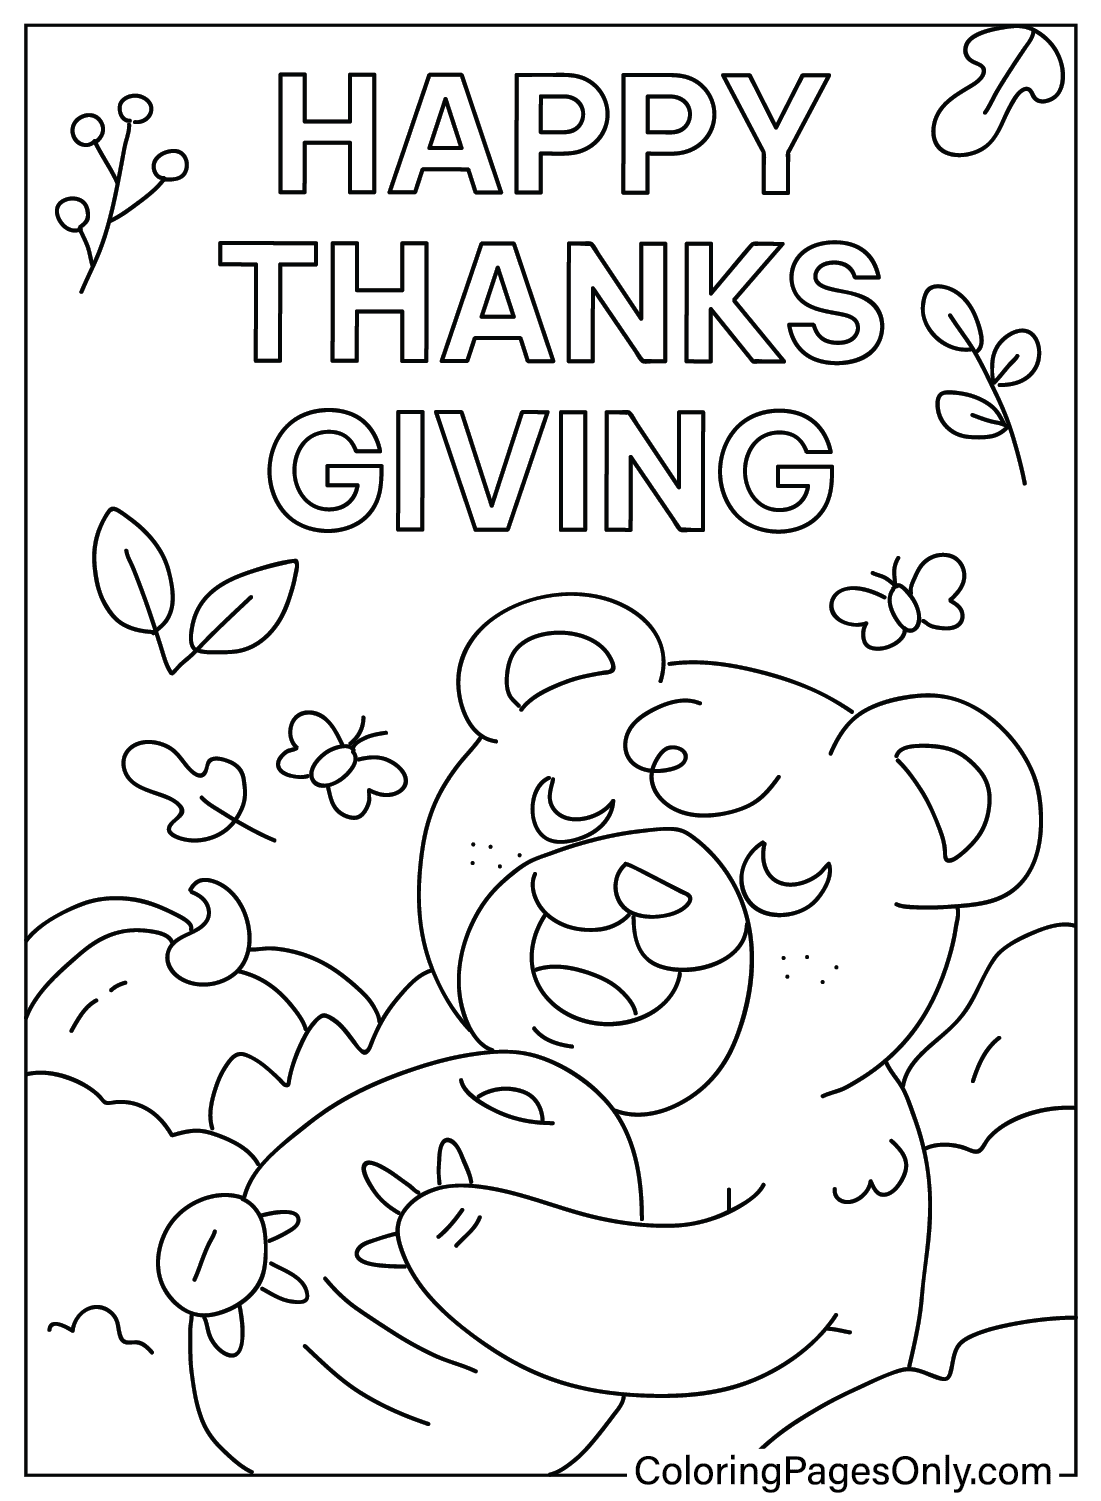 coloring-pages-for-thanksgiving-free-printable-coloring-pages